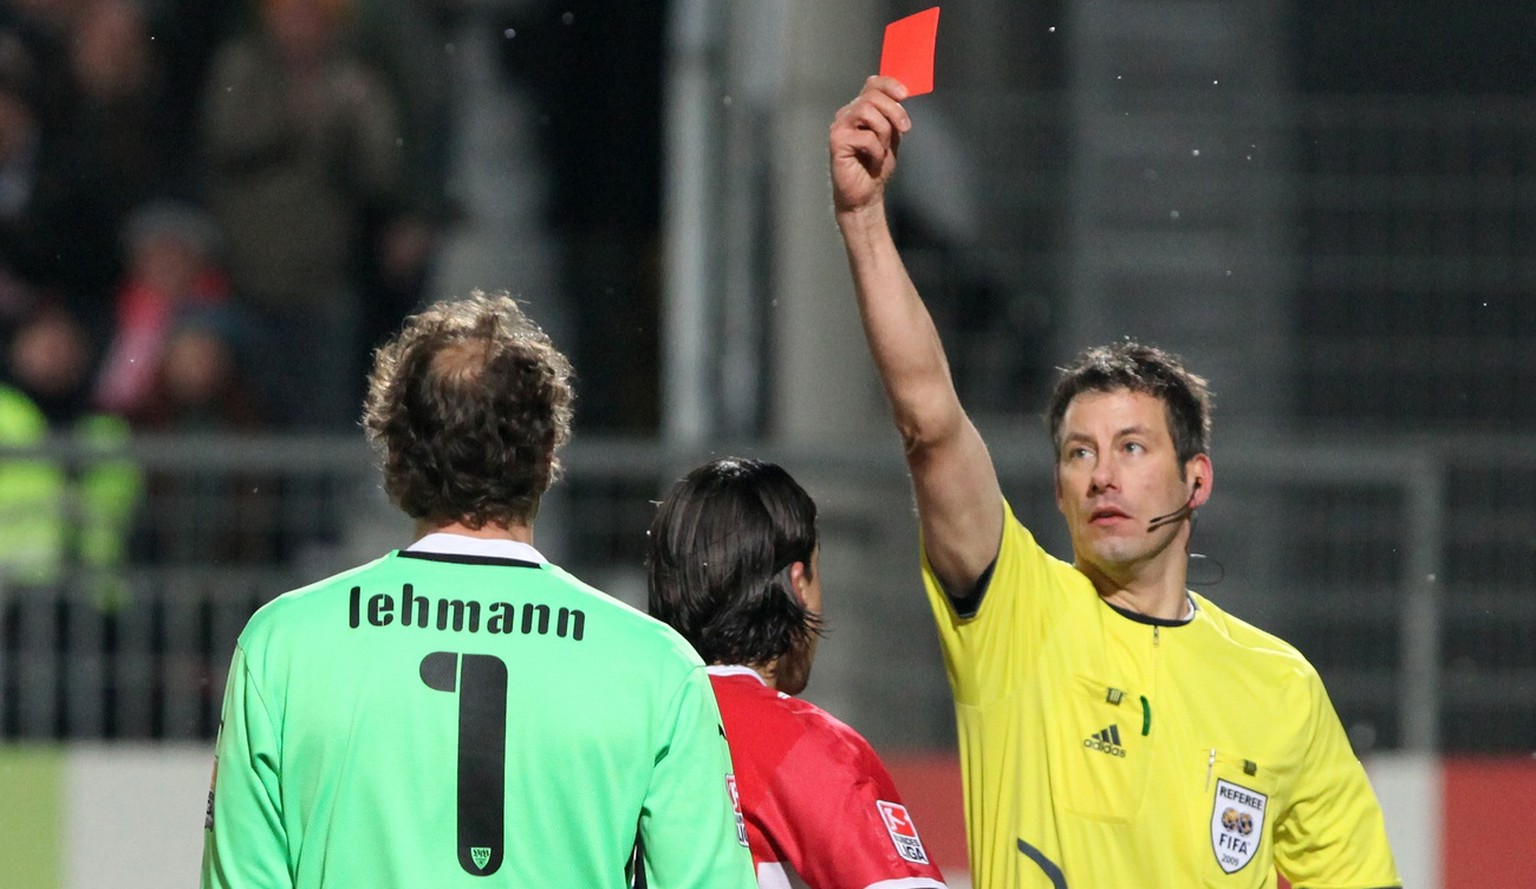 In this picture taken Dec. 13, 2009 referee Wolfgang Stark, right, shows a red card to former national goalie and Stuttgart's keeper Jens Lehmann, left, after tackling Aristide Bance, not in the pictu ...